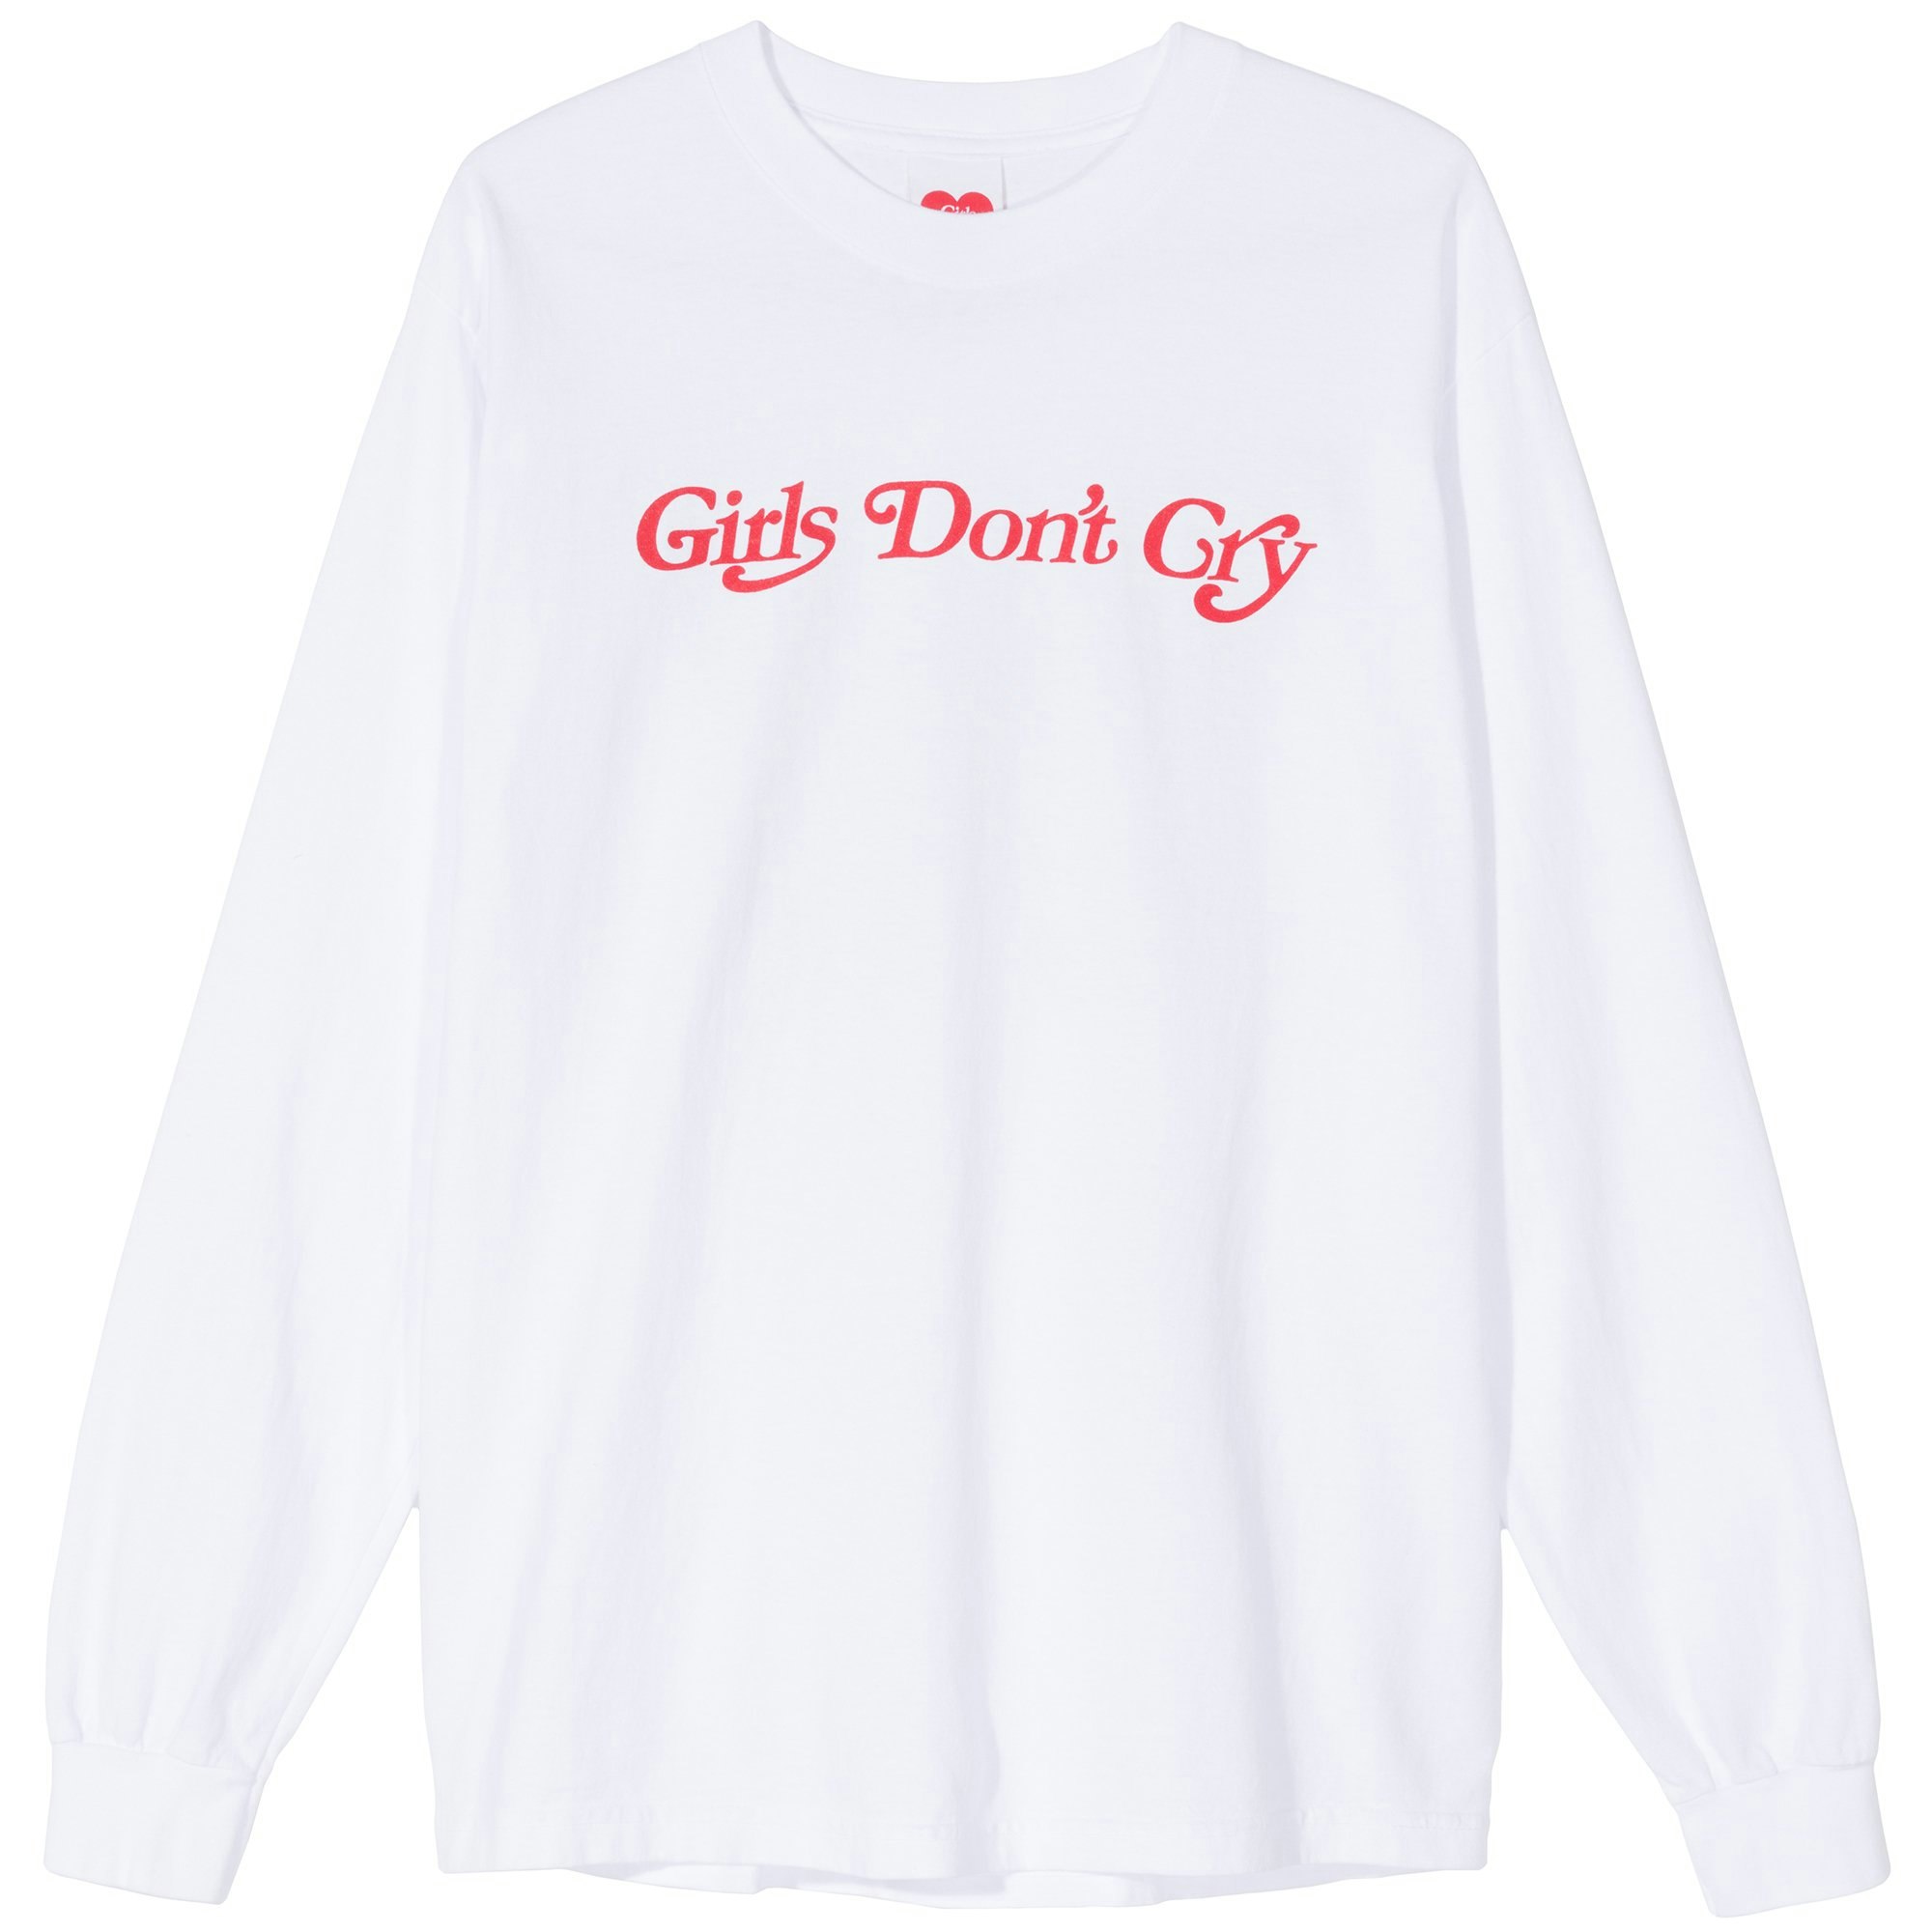 Girl's Don't Cry Butterfly Hoody size M - パーカー